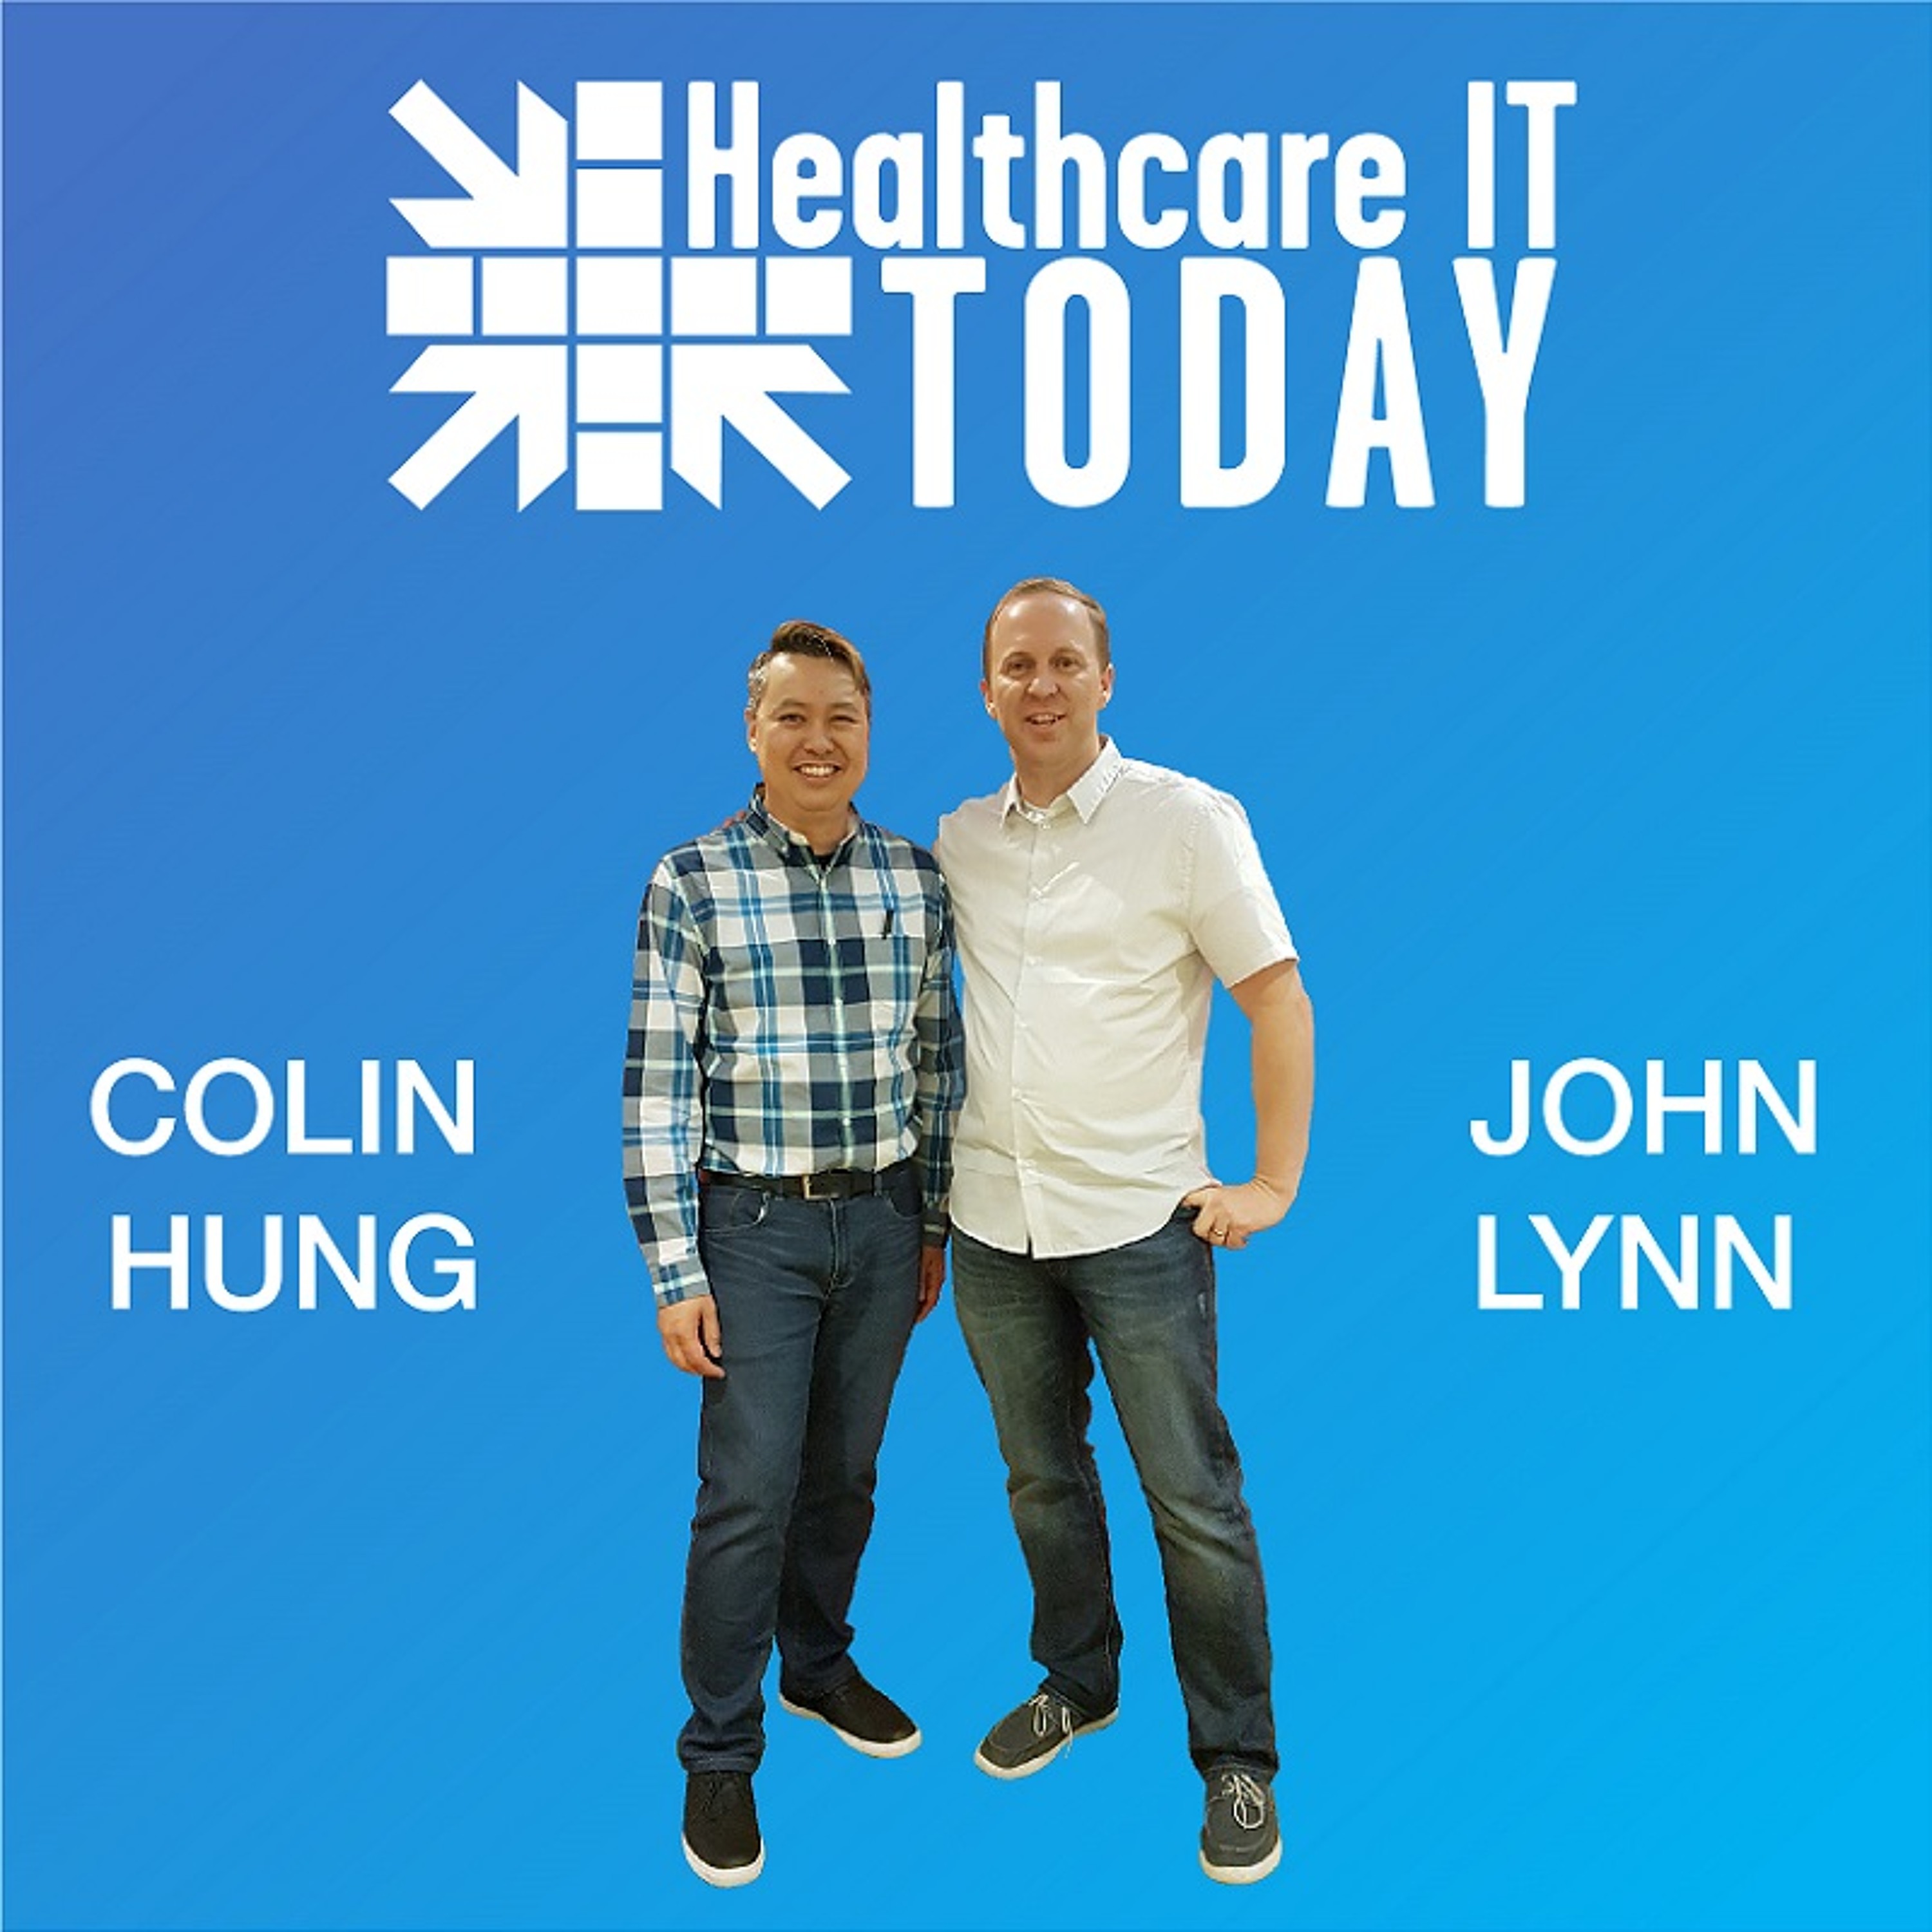 Healthcare IT Today: Is Healthcare More Risky?